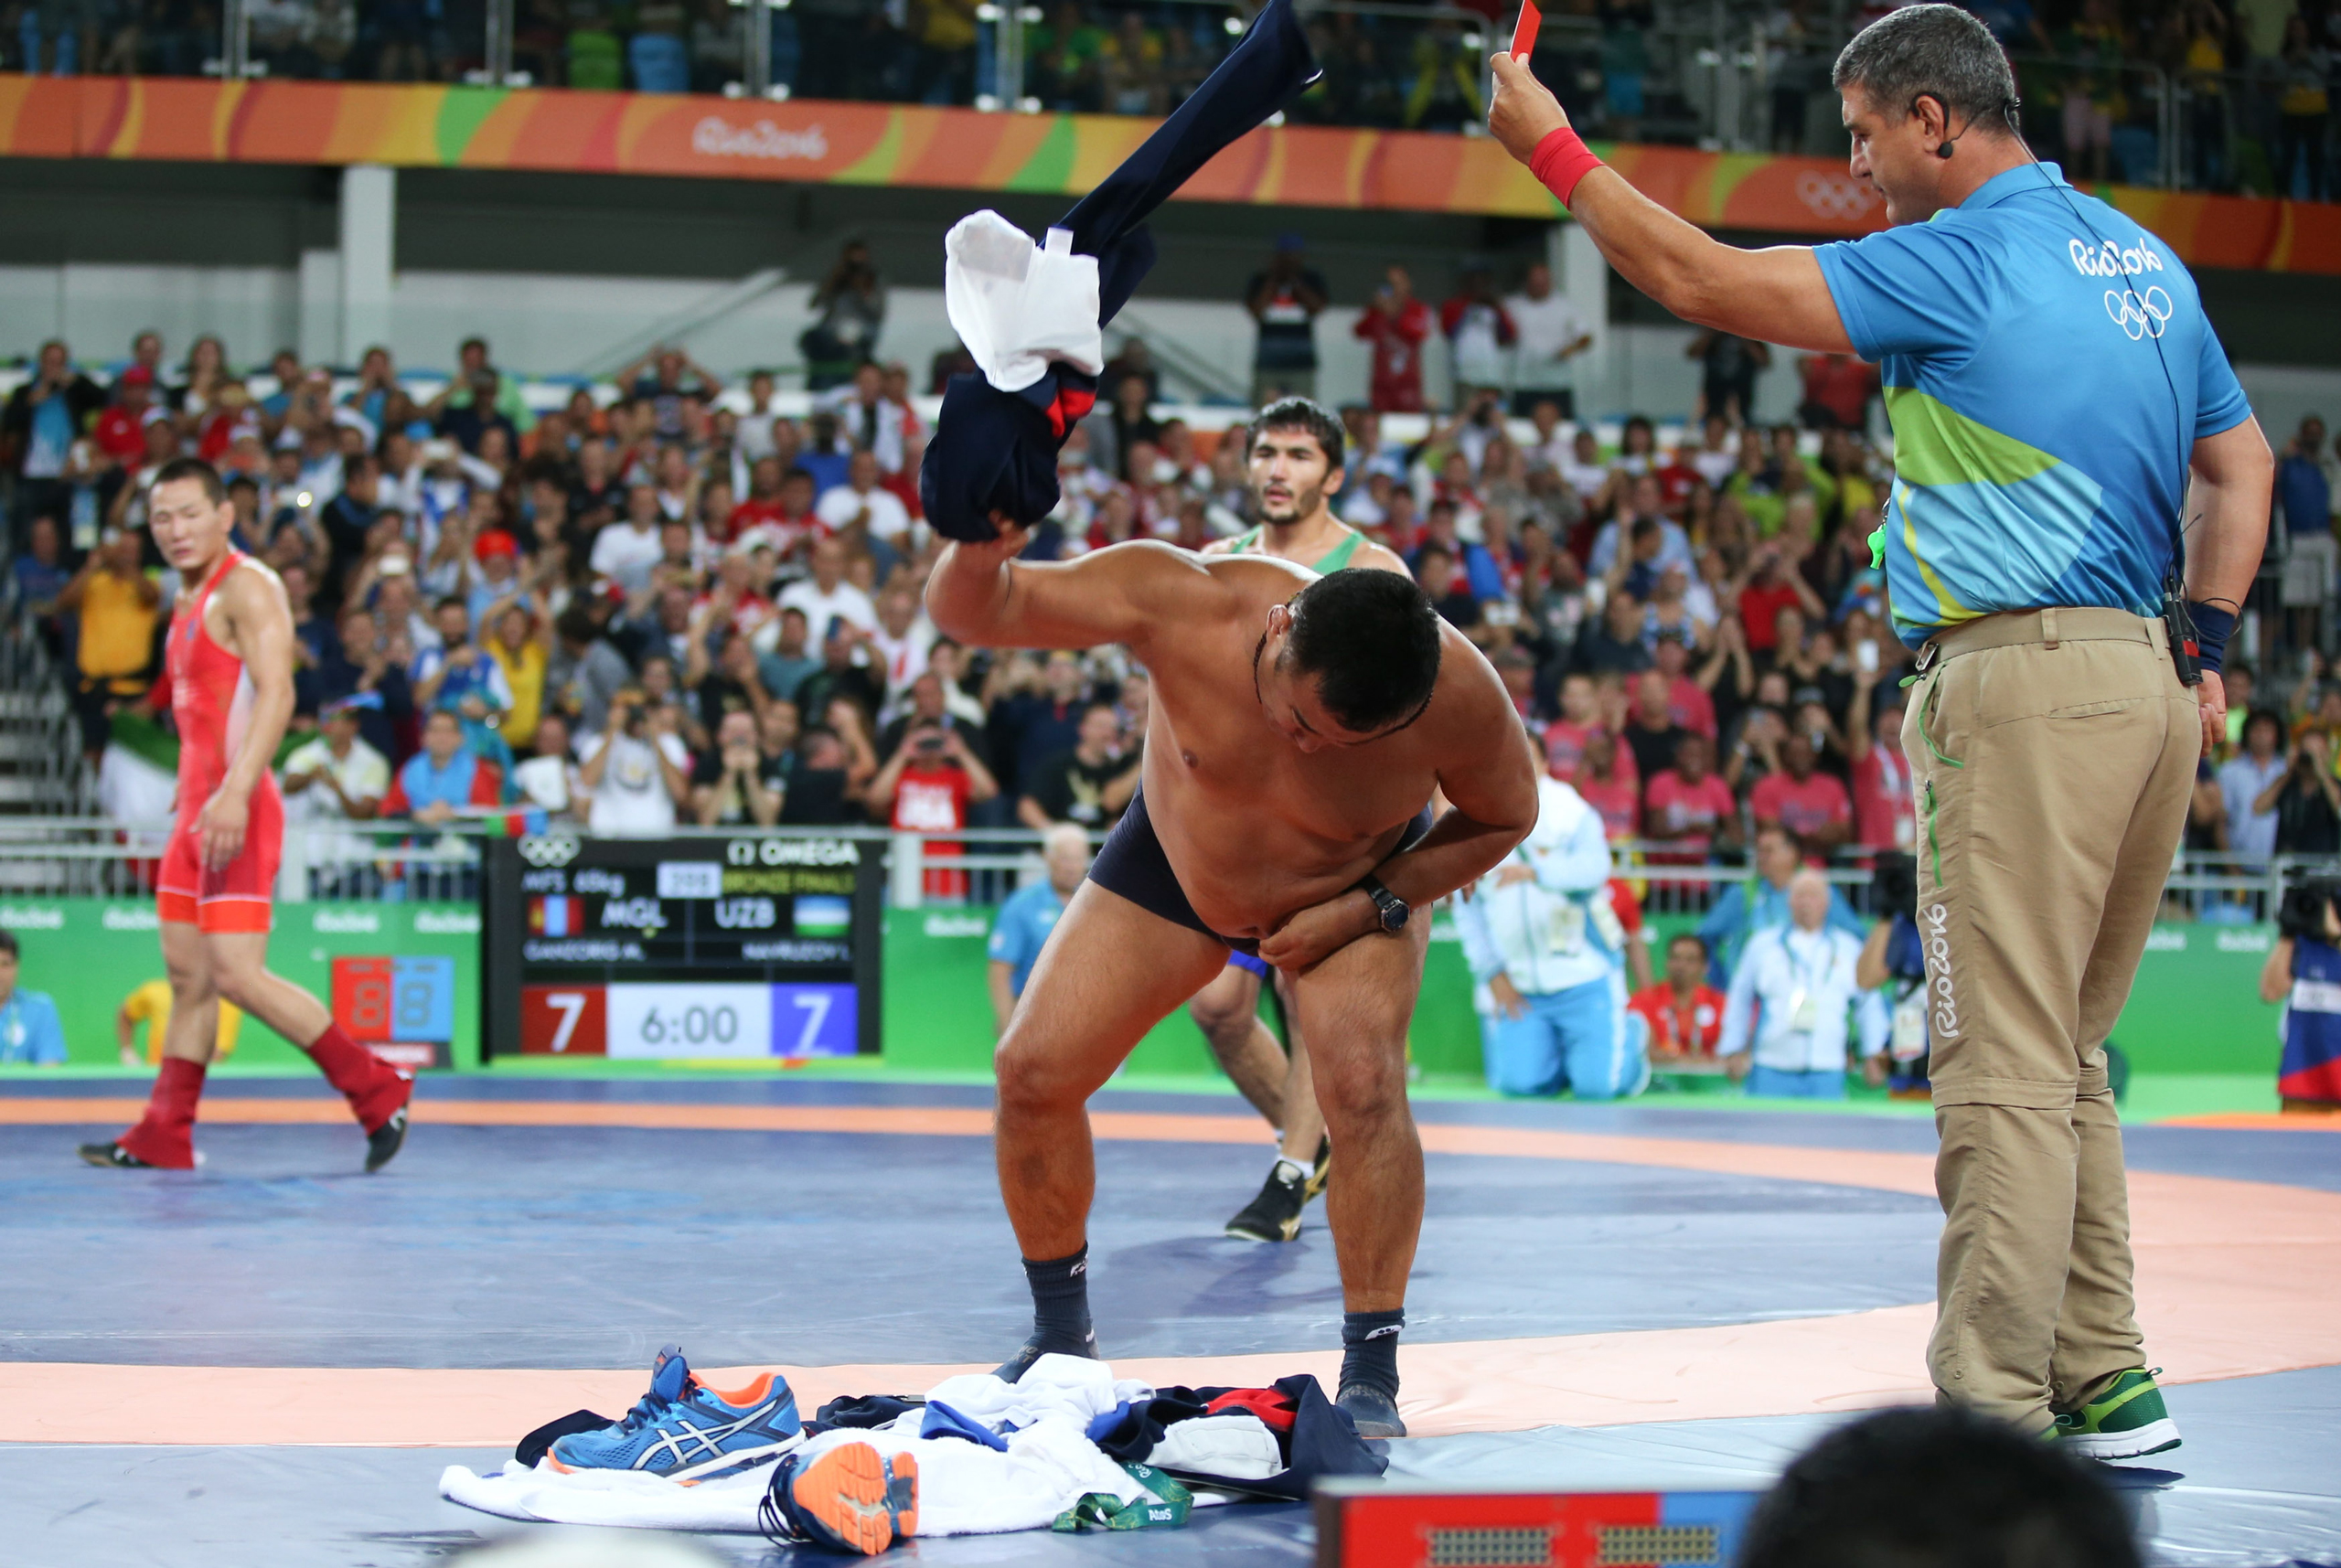 The coach of Mongolian wrestler Ganzorigiin Mandakhnaran takes off his clothes as he protests after the men's freestyle 65-kg bronze-medal match against Ikhtiyor Navruzov of Uzbekistan at the Olympic Games on Aug. 21, 2016 (Toru Hanai—Reuters)